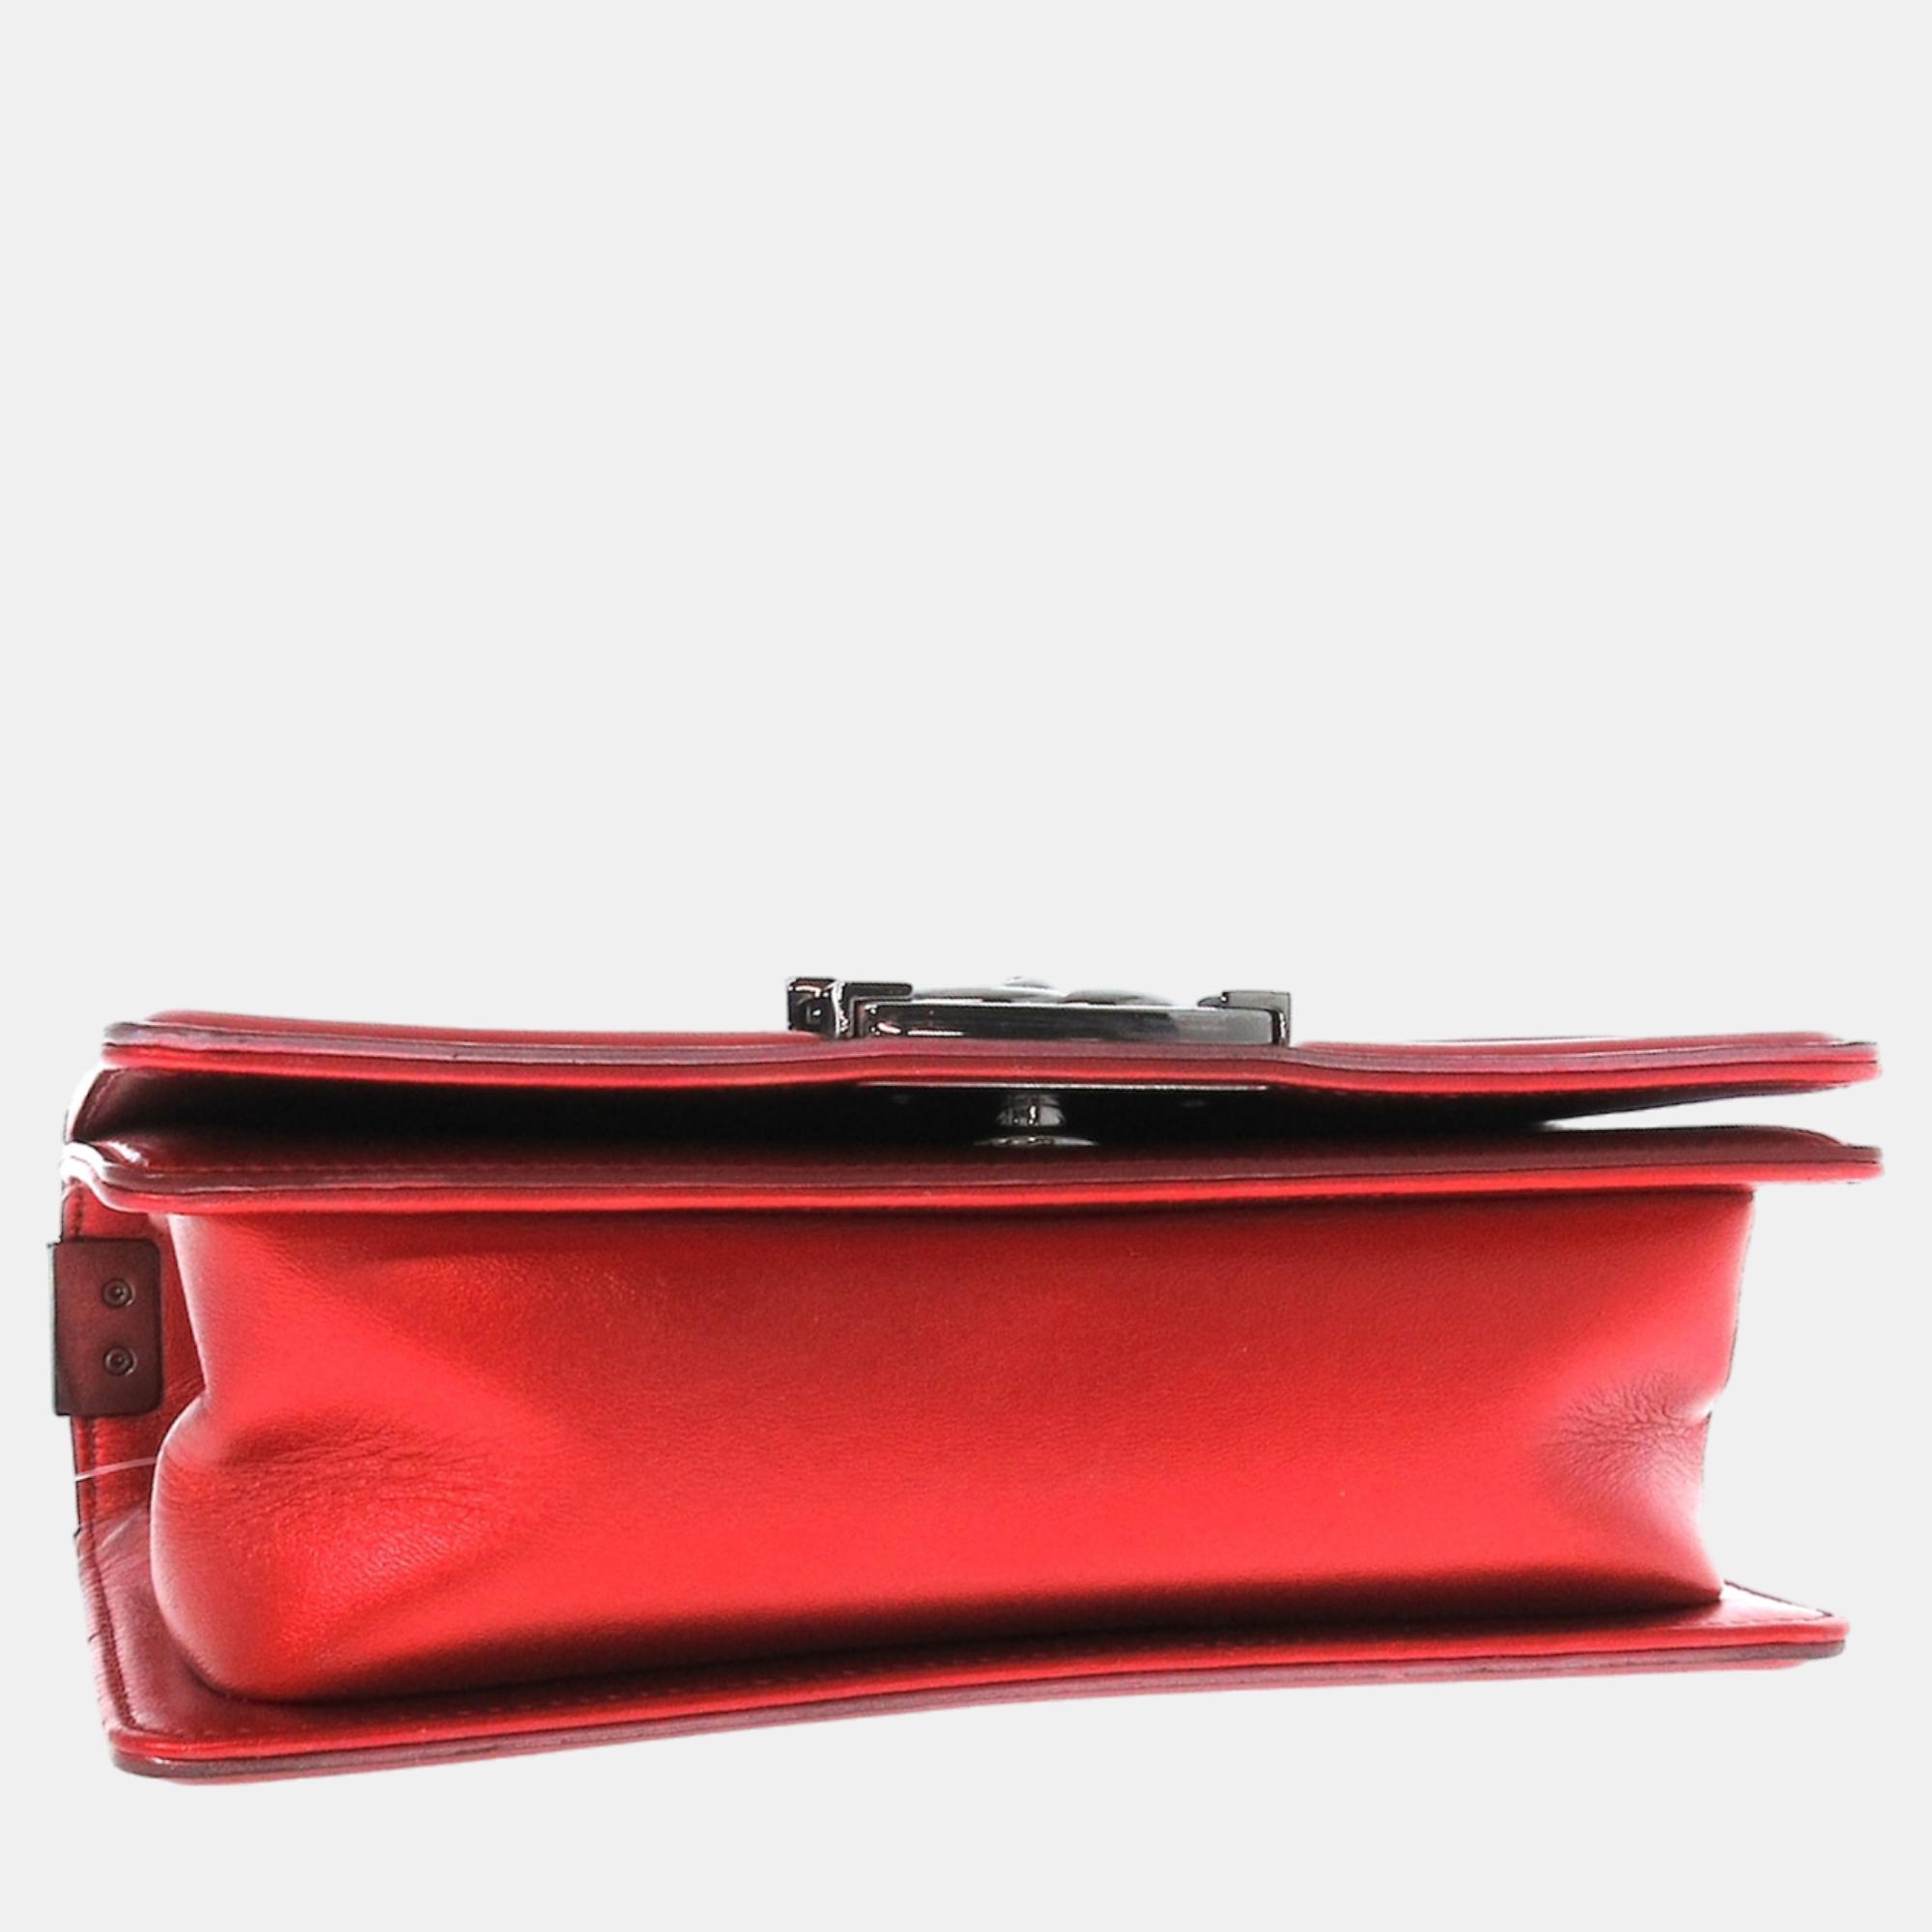 Chanel Red Small Patent Boy Flap Bag